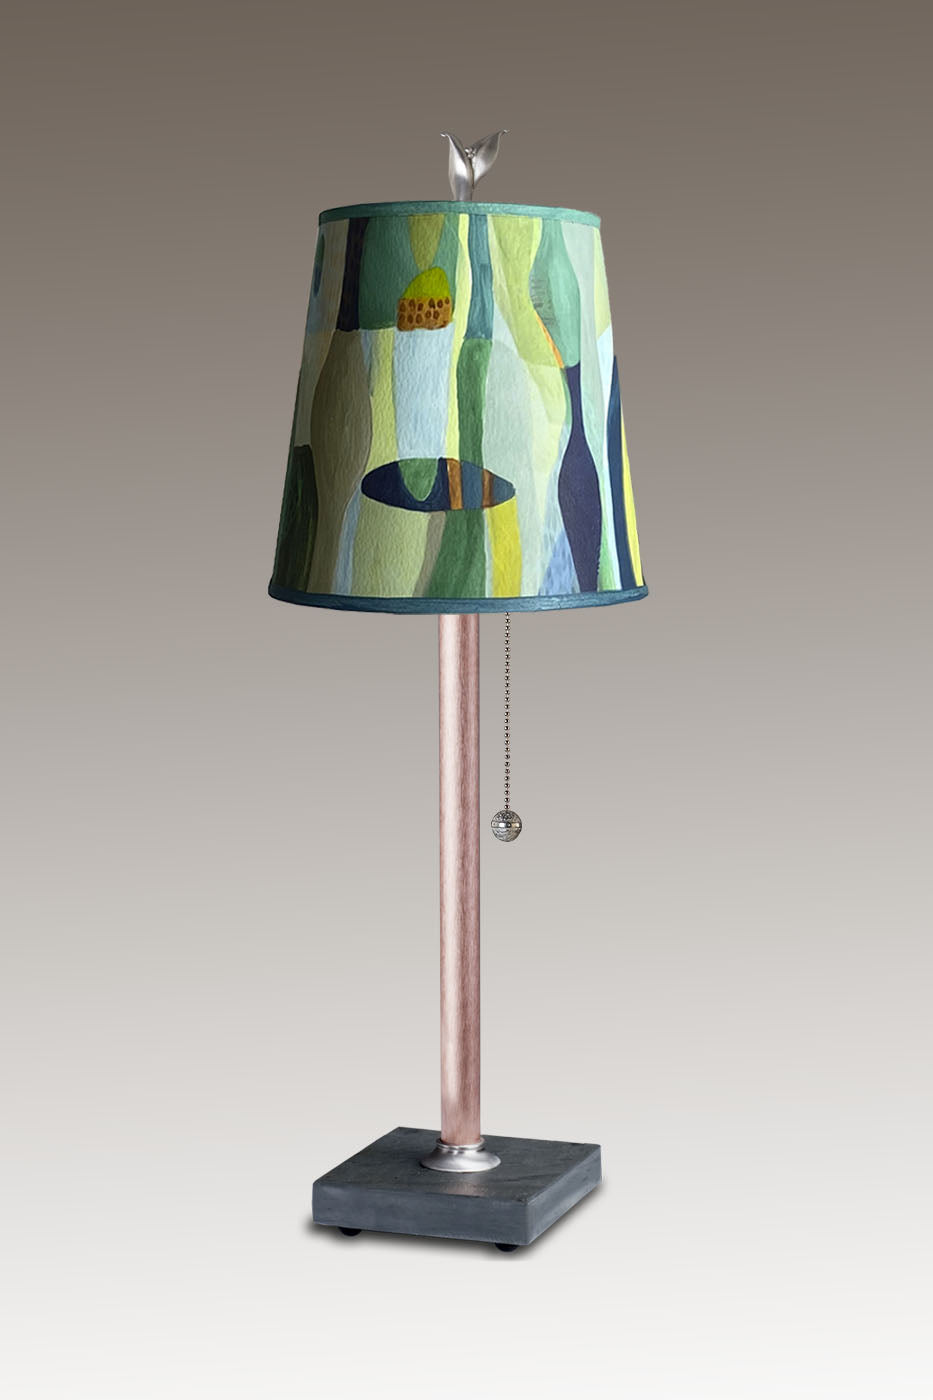 Janna Ugone & Co Table Lamp Copper Table Lamp with Small Drum Shade in Riviera in Citrus